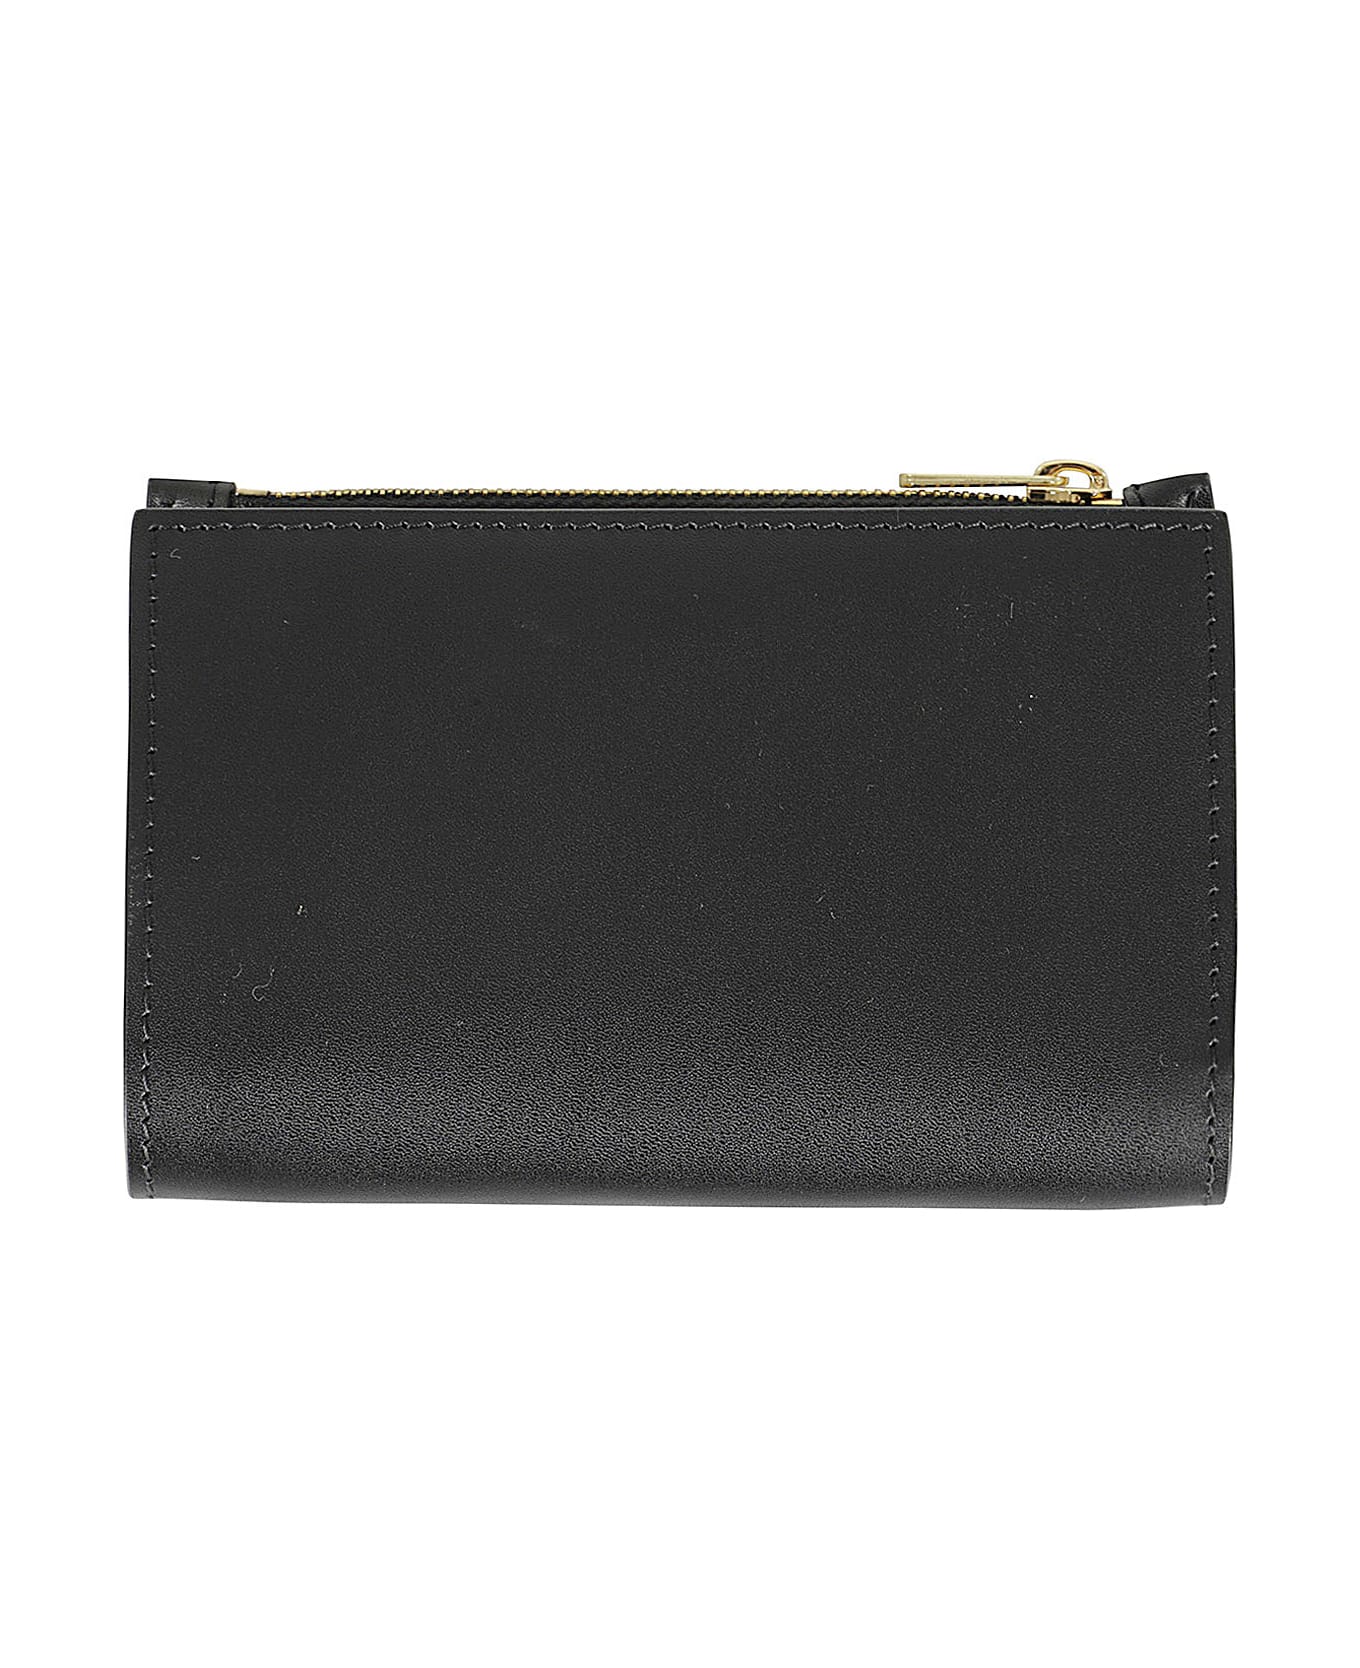 A.P.C. Willy Logo Embossed Wallet - Lzz Black